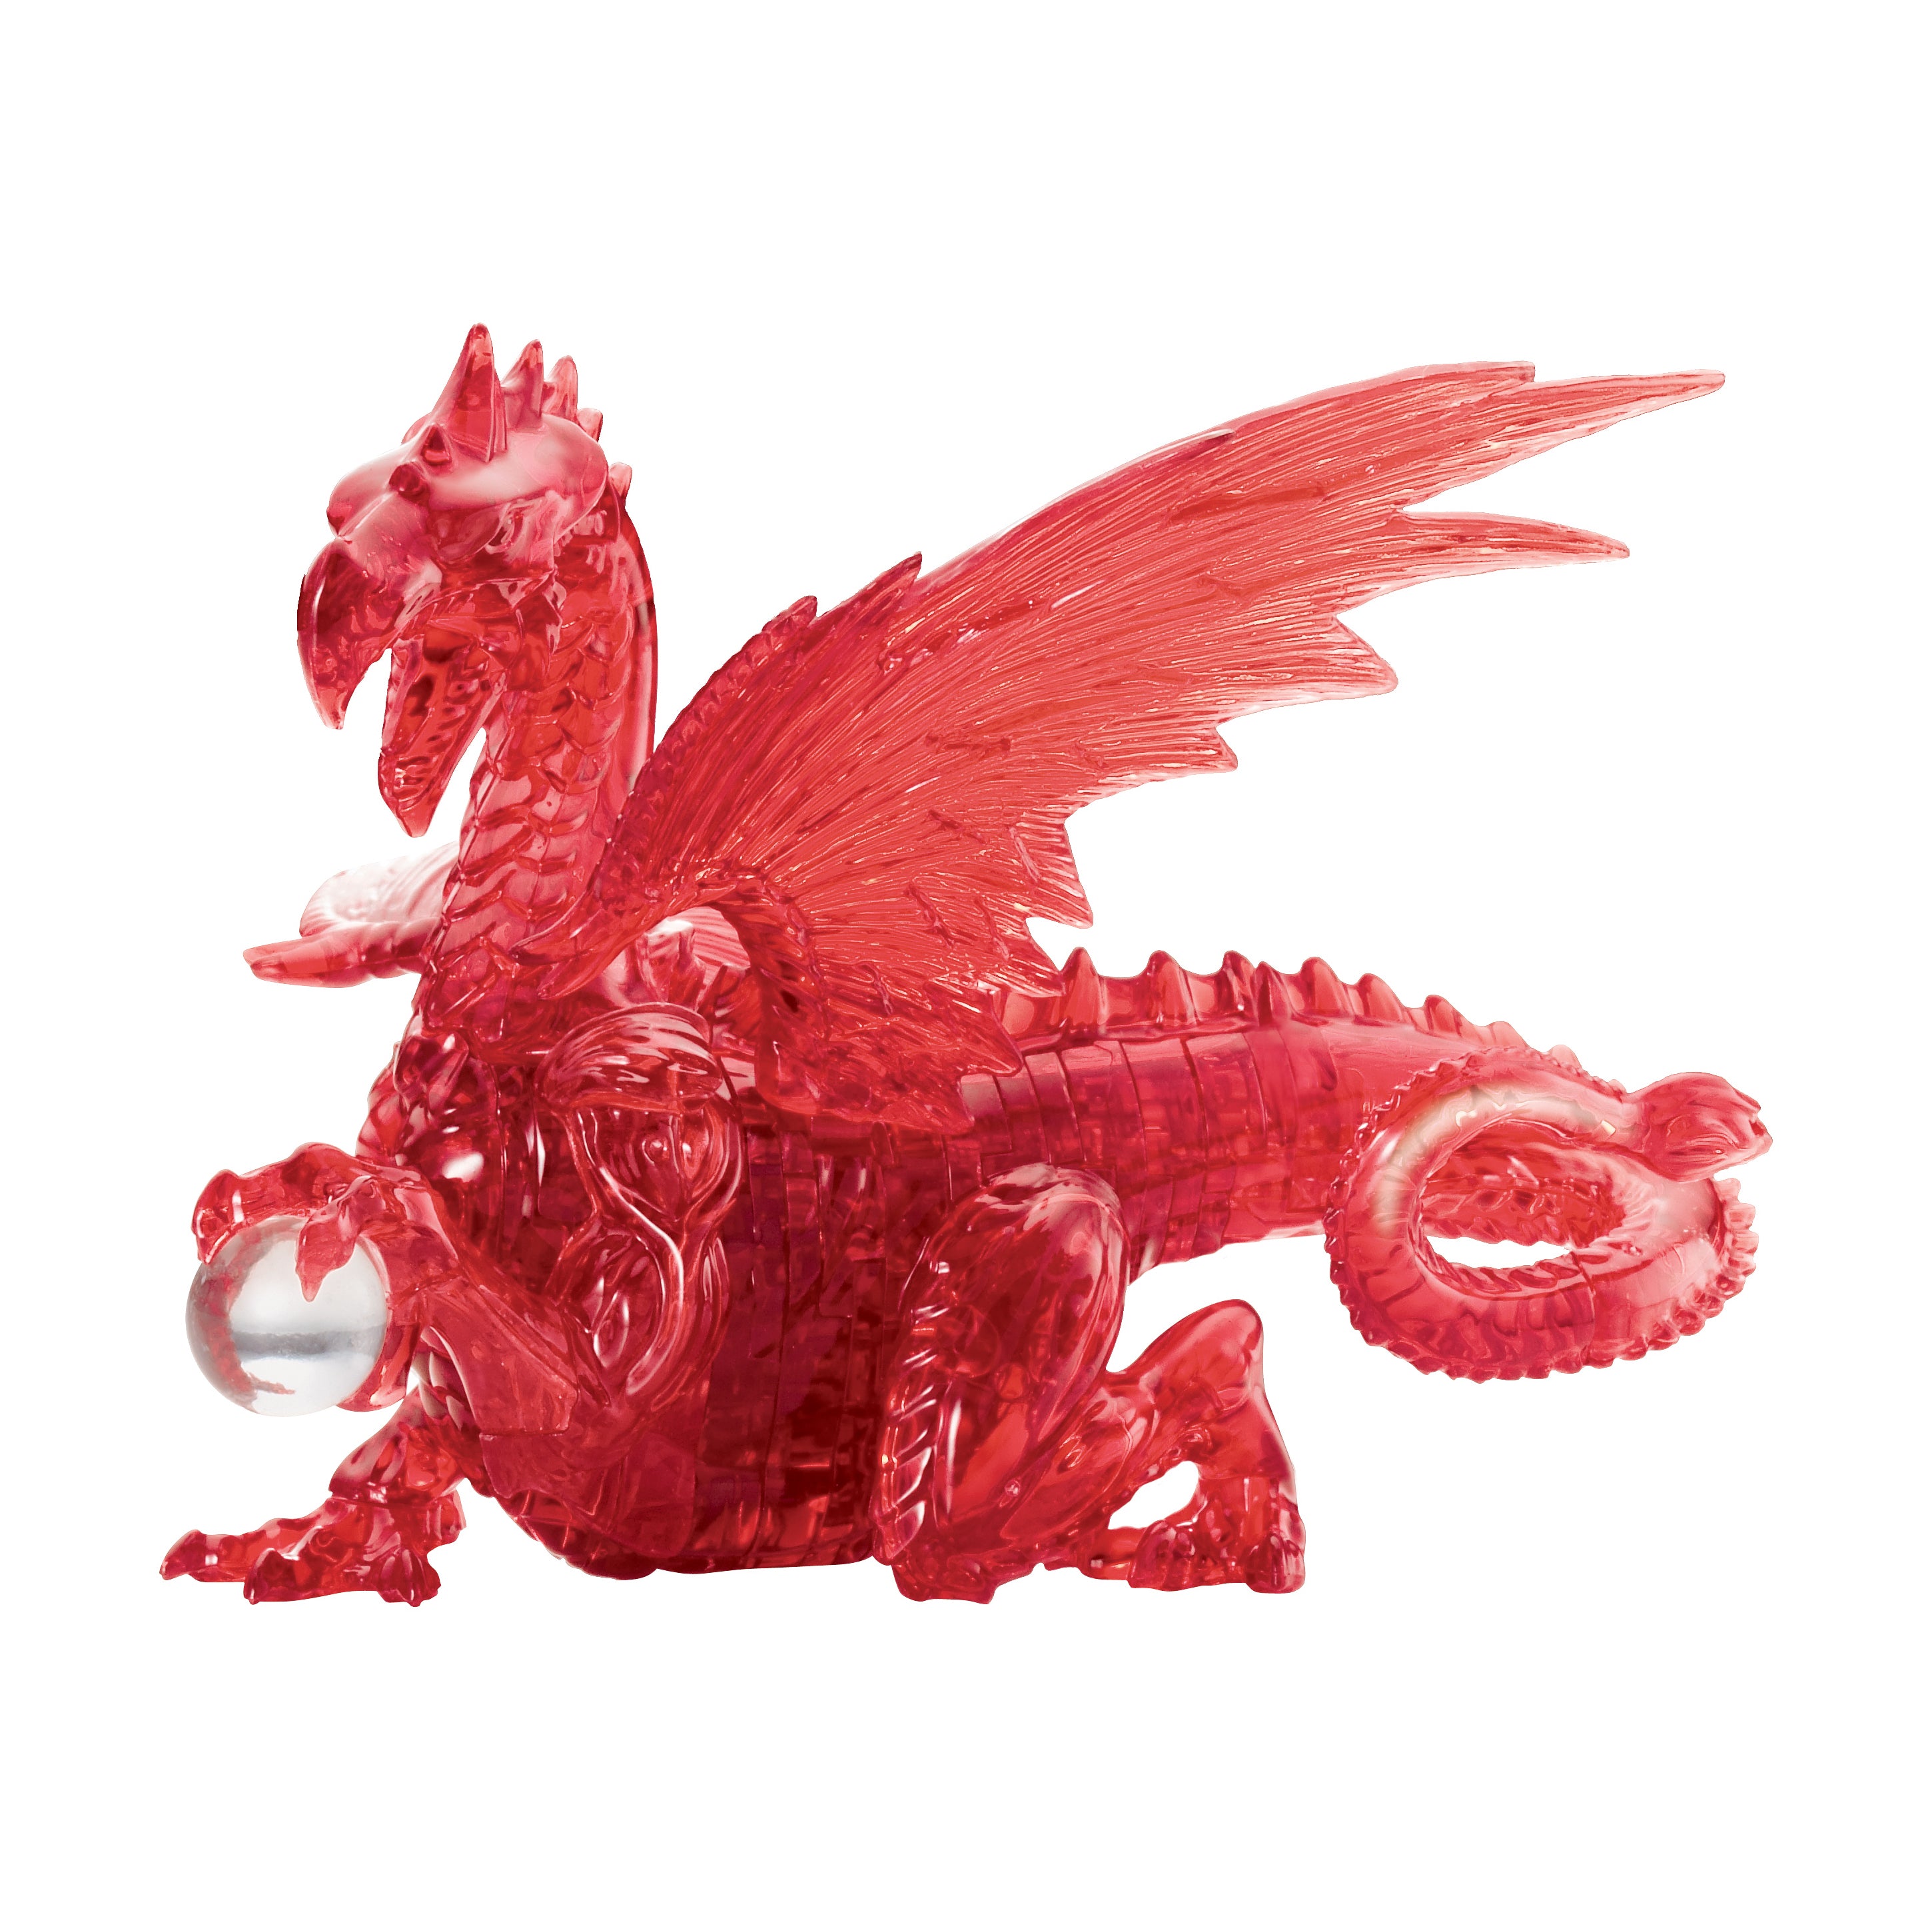 3D Crystal Puzzle - Dragon (Red): 56 Pcs